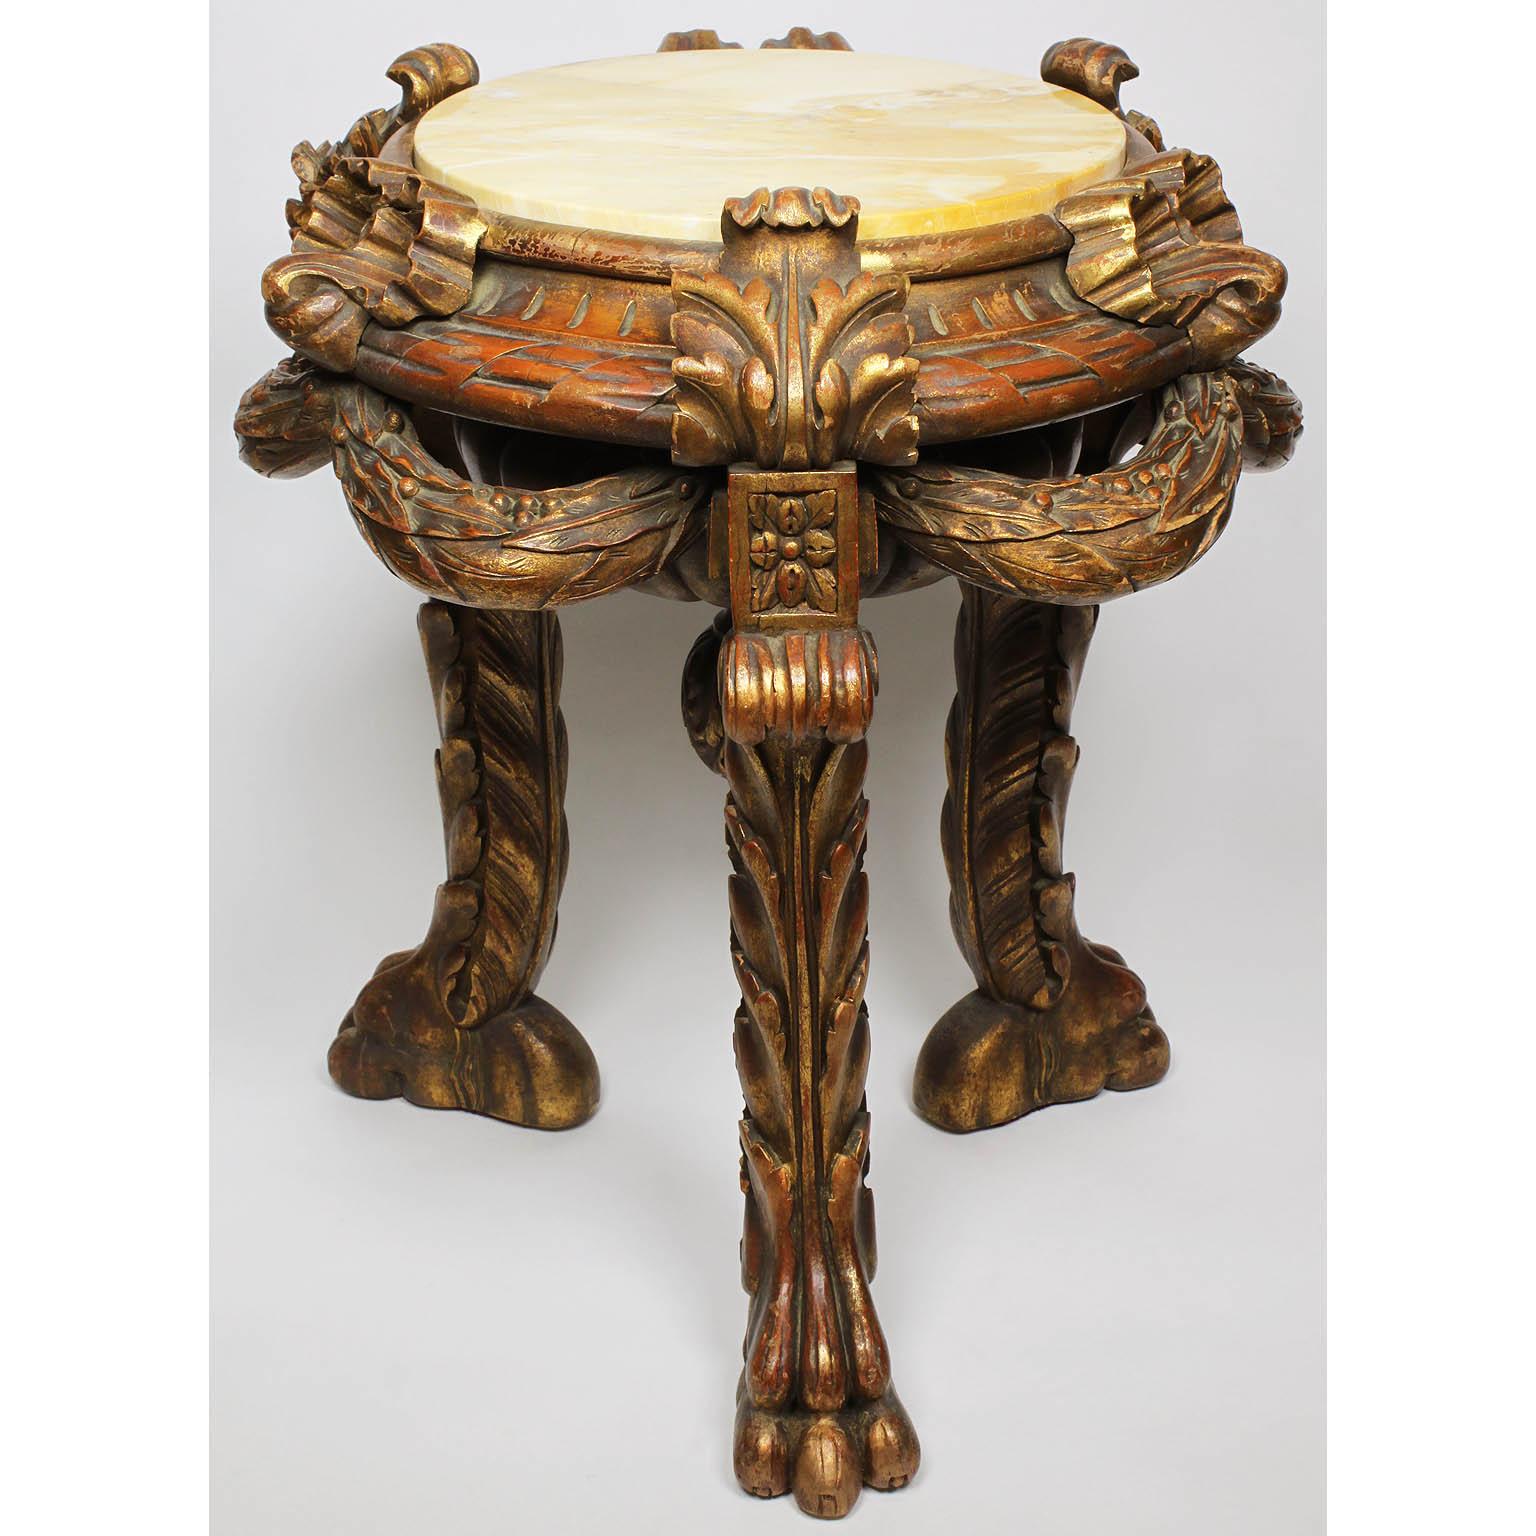 A French 19th-20th century Baroque Revival style giltwood carved three-legged pedestal stand with marble top. The circular gilt wood carved top with ribbons and wreaths with a circular veined yellow marble top, all raised on three acanthus cabriolet